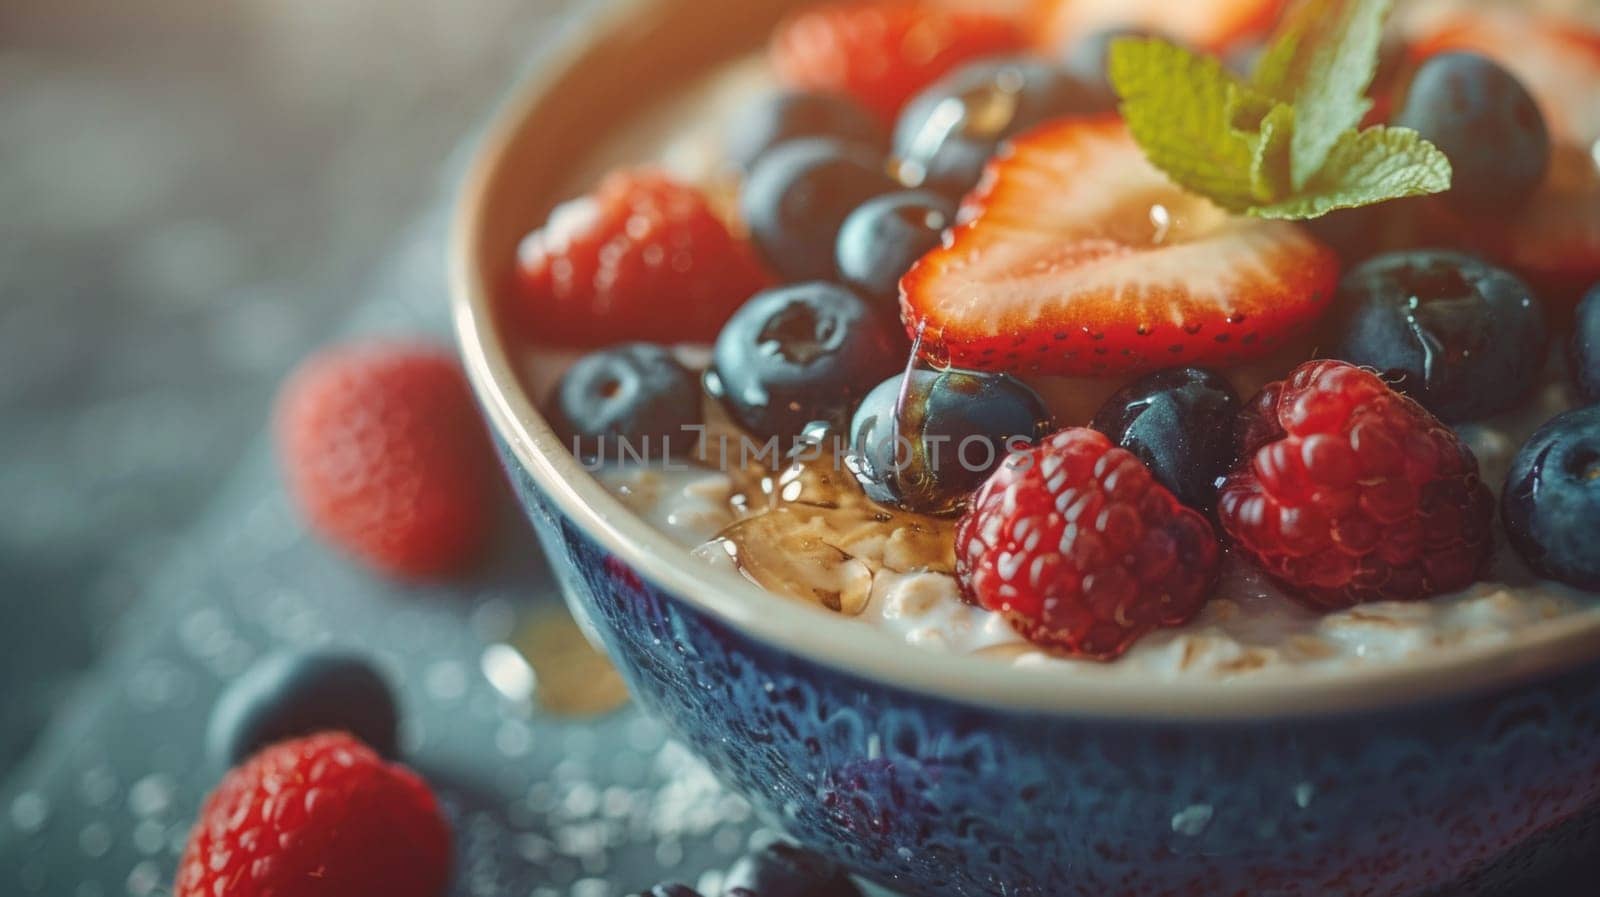 A bowl of berries and oatmeal with mint leaves on top, AI by starush